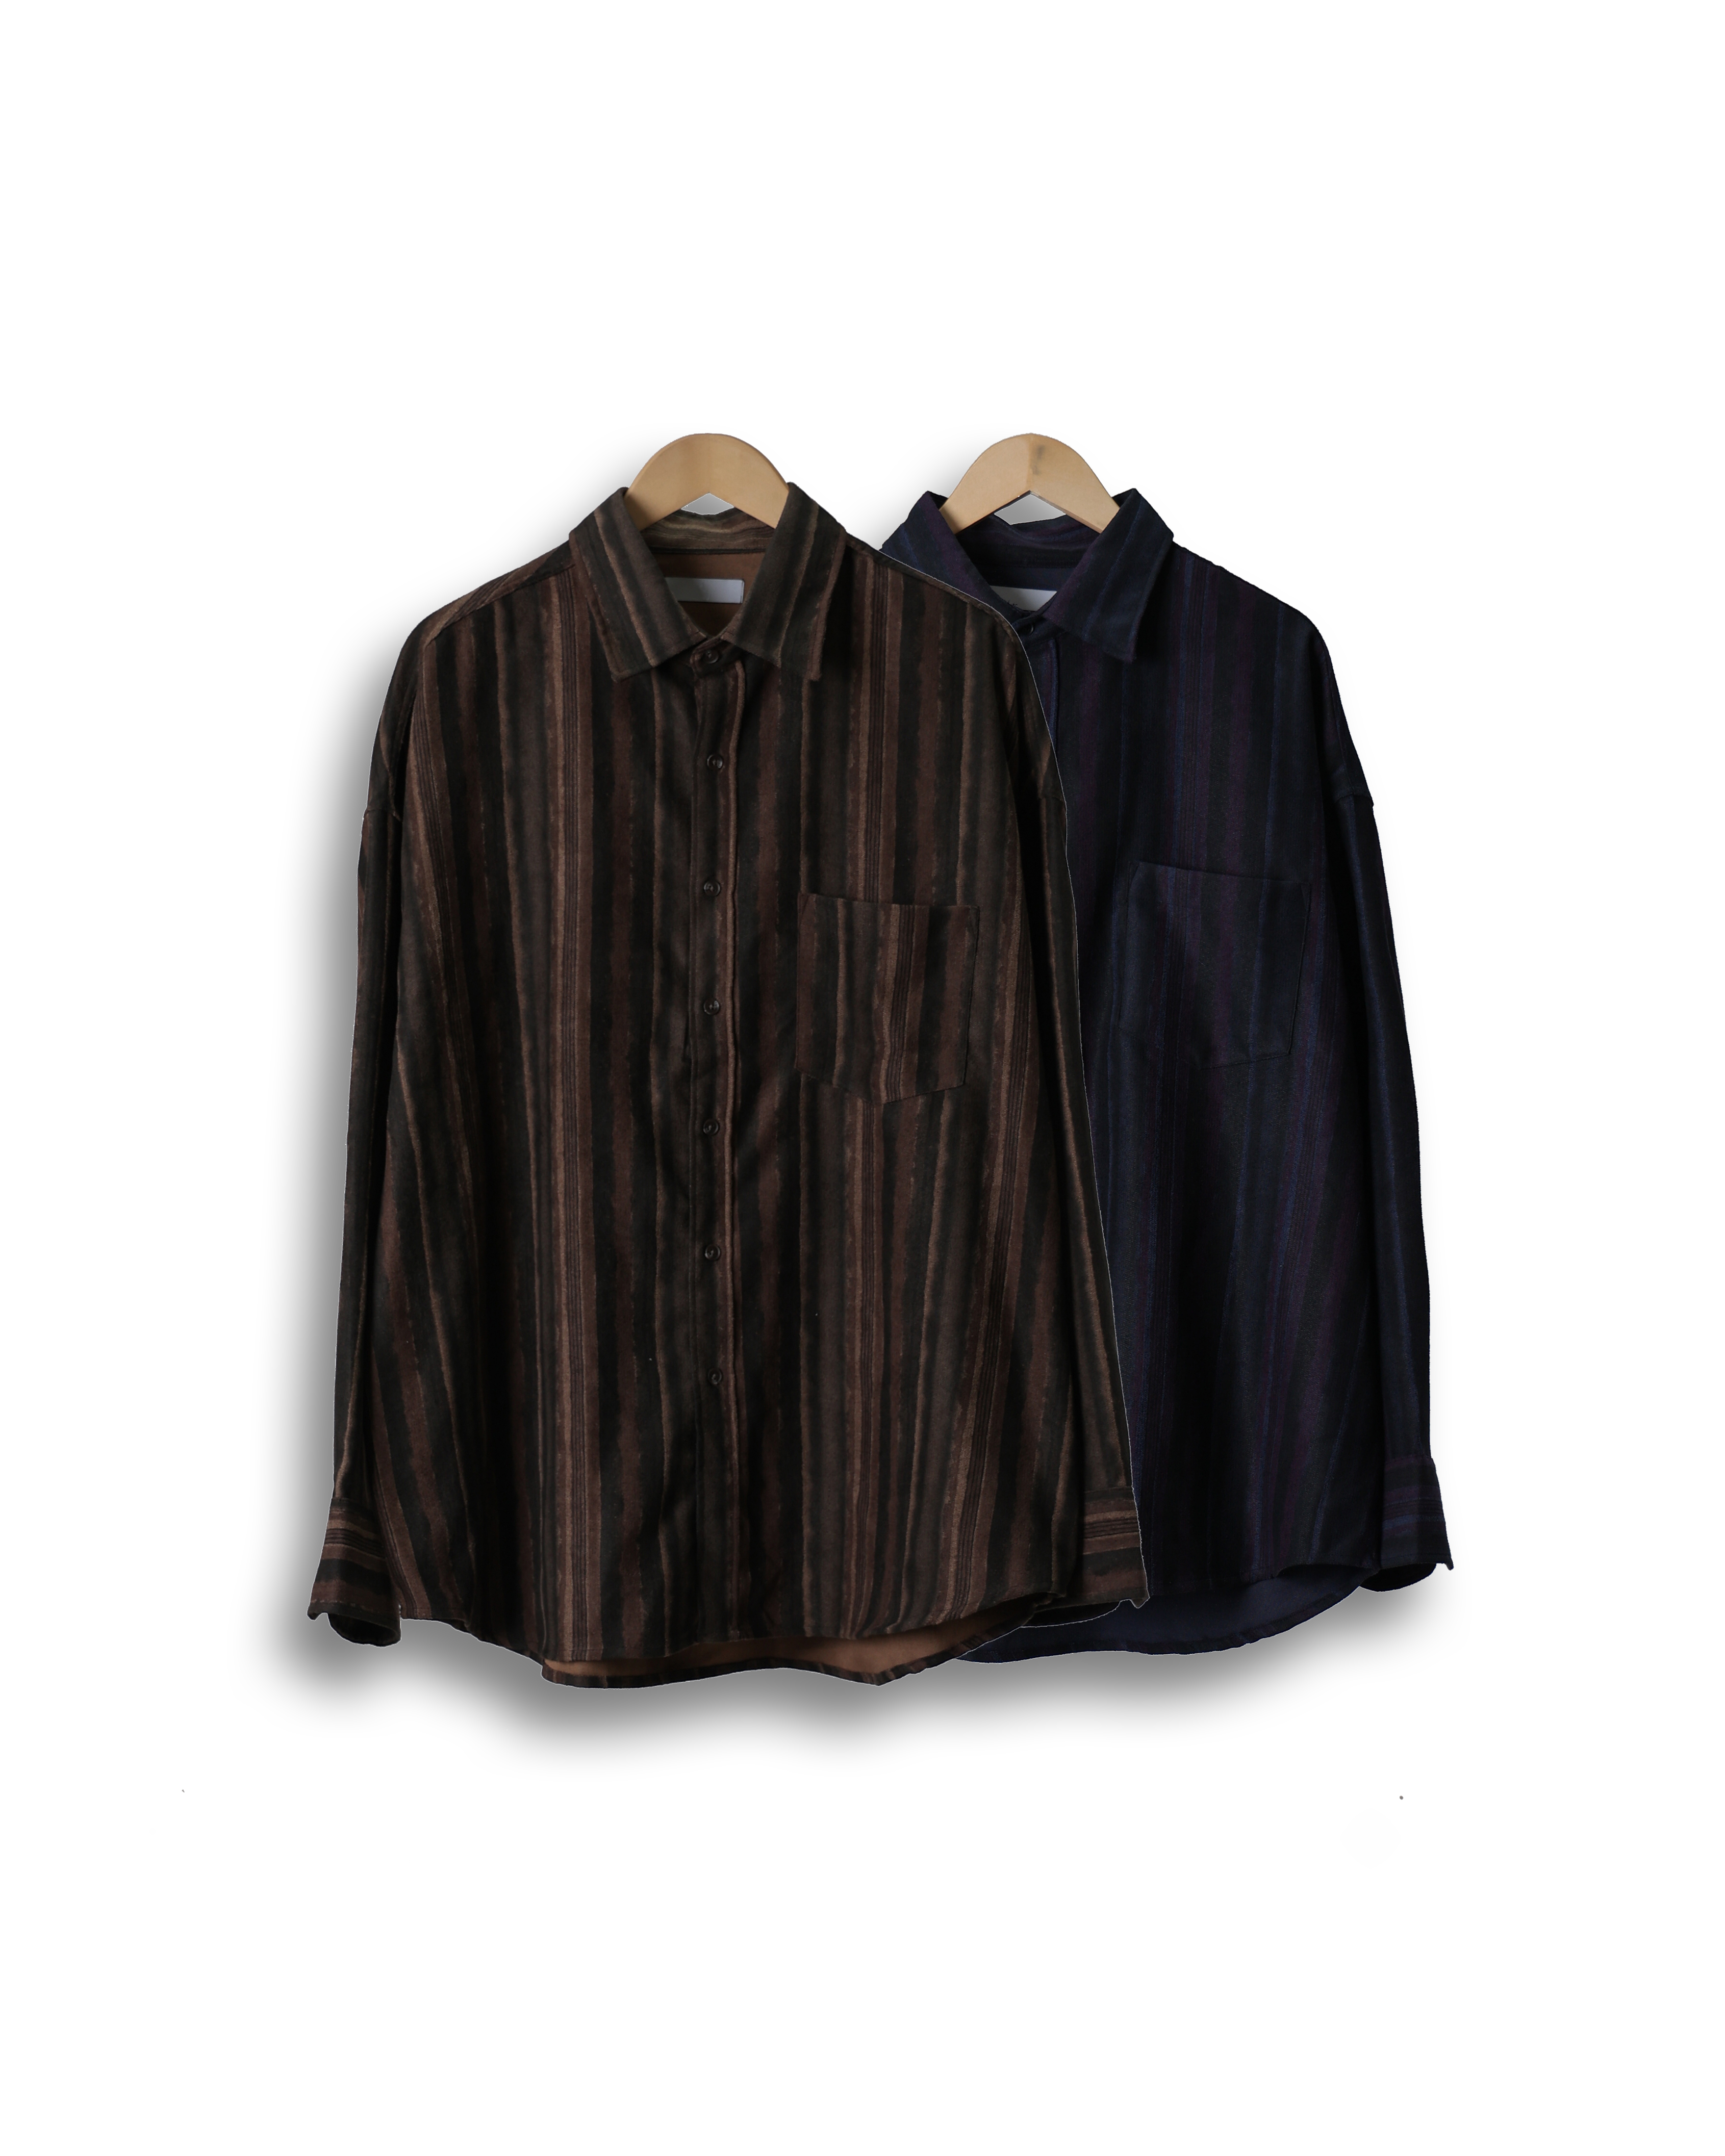 CONS Paint Brushed Stripe Over Shirts (Black/Brown)